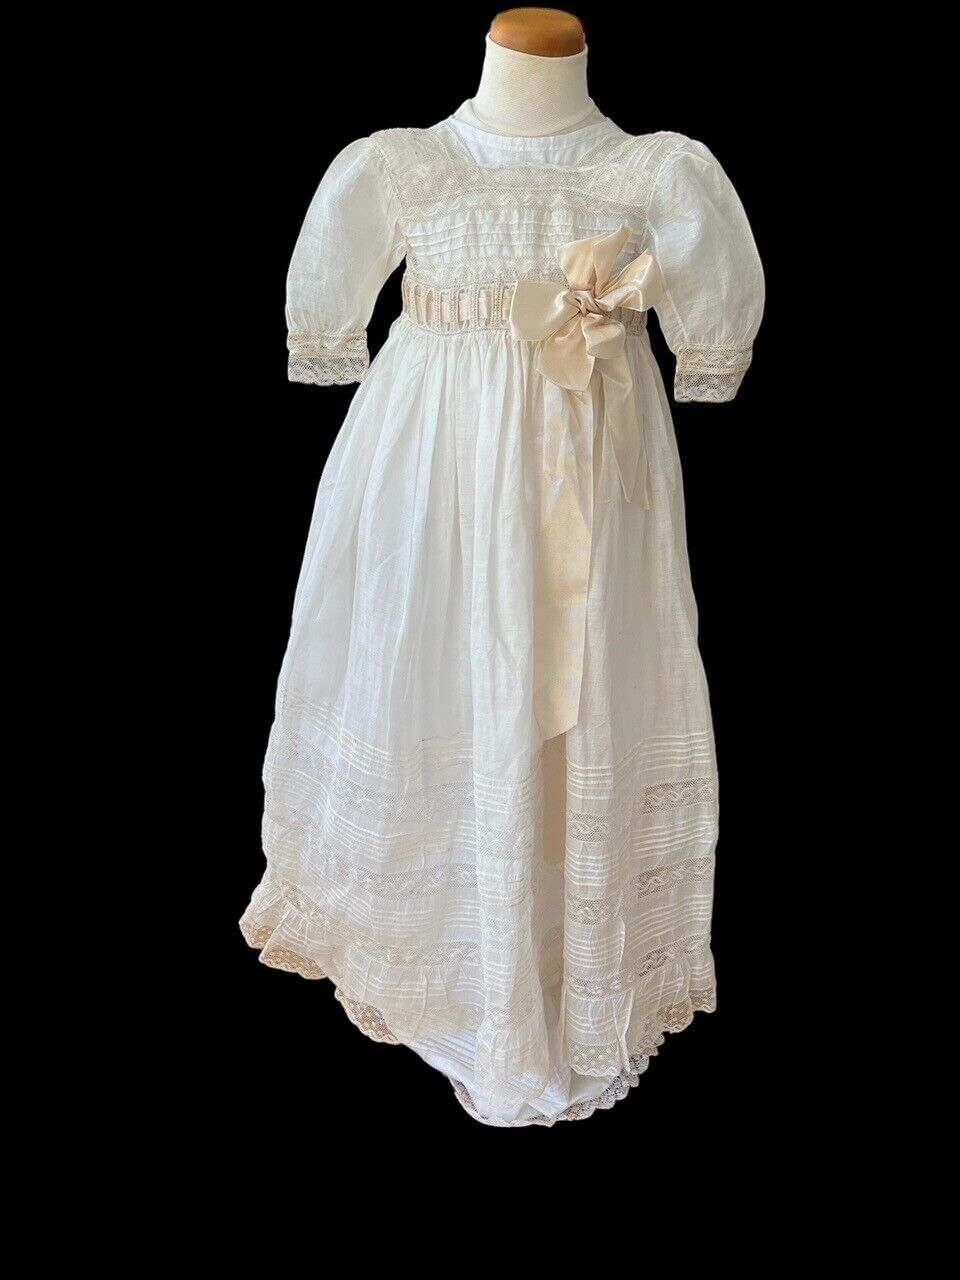 ANTIQUE LACE-CIRCA 1900.FINE LAWN CHRISTENING GOWN W/RIBBONS,VALENCIENNE LACE